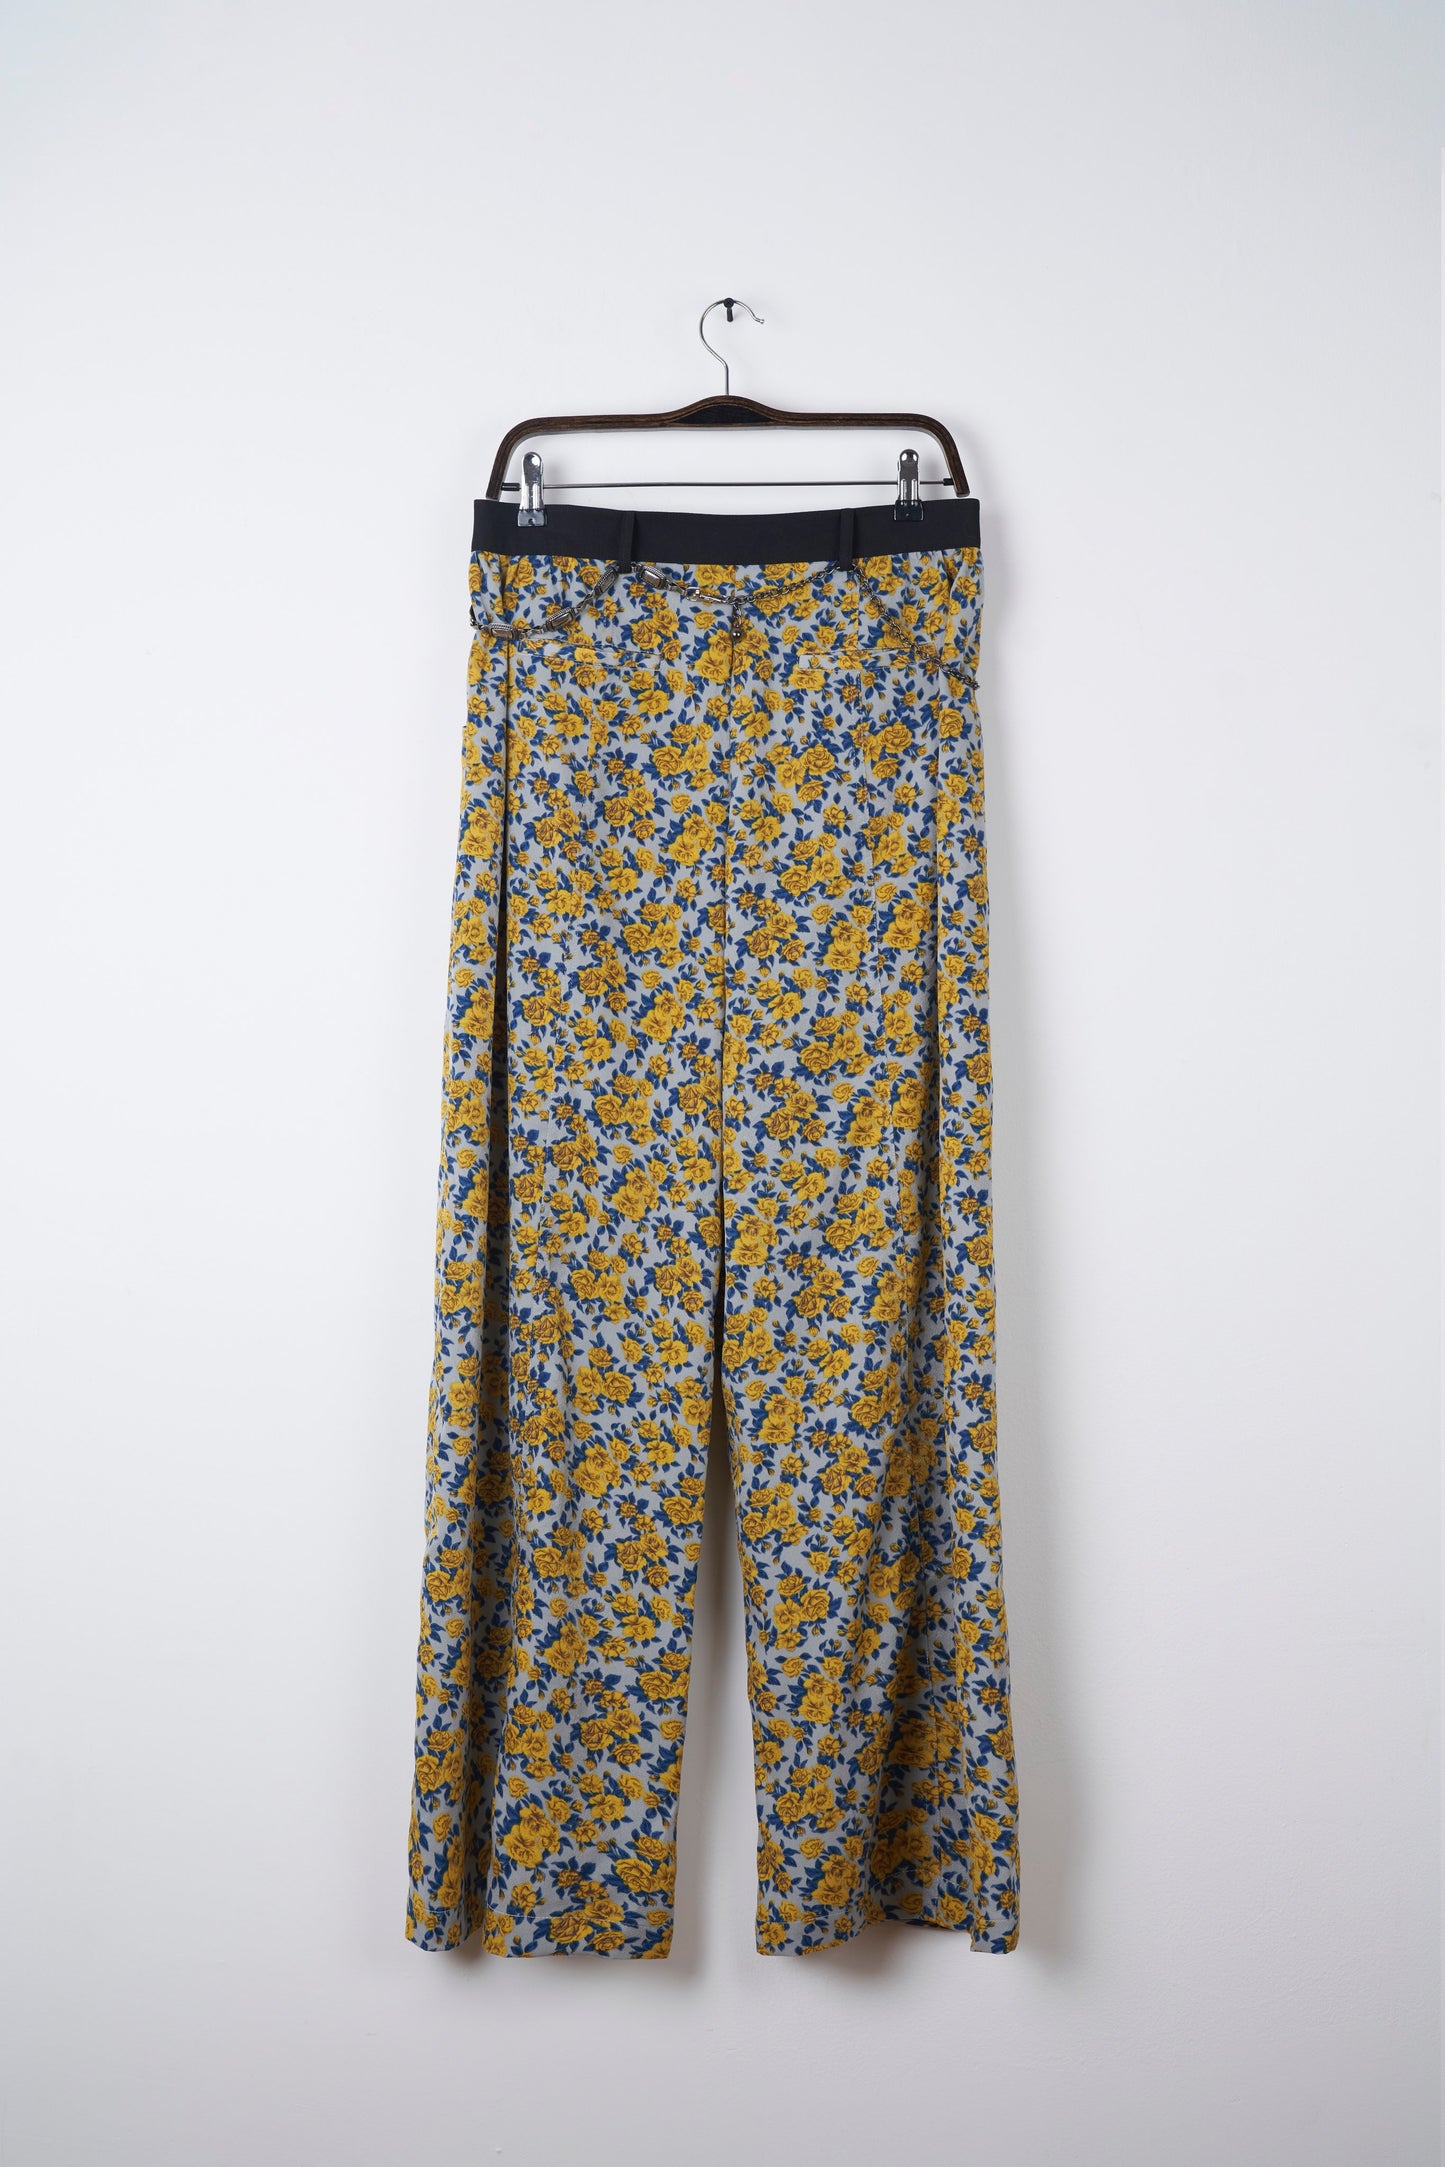 SLATE GREY BLOSSOM MOTIF WIDE-LEG PANTS WITH SILVER MOTIF CHAIN